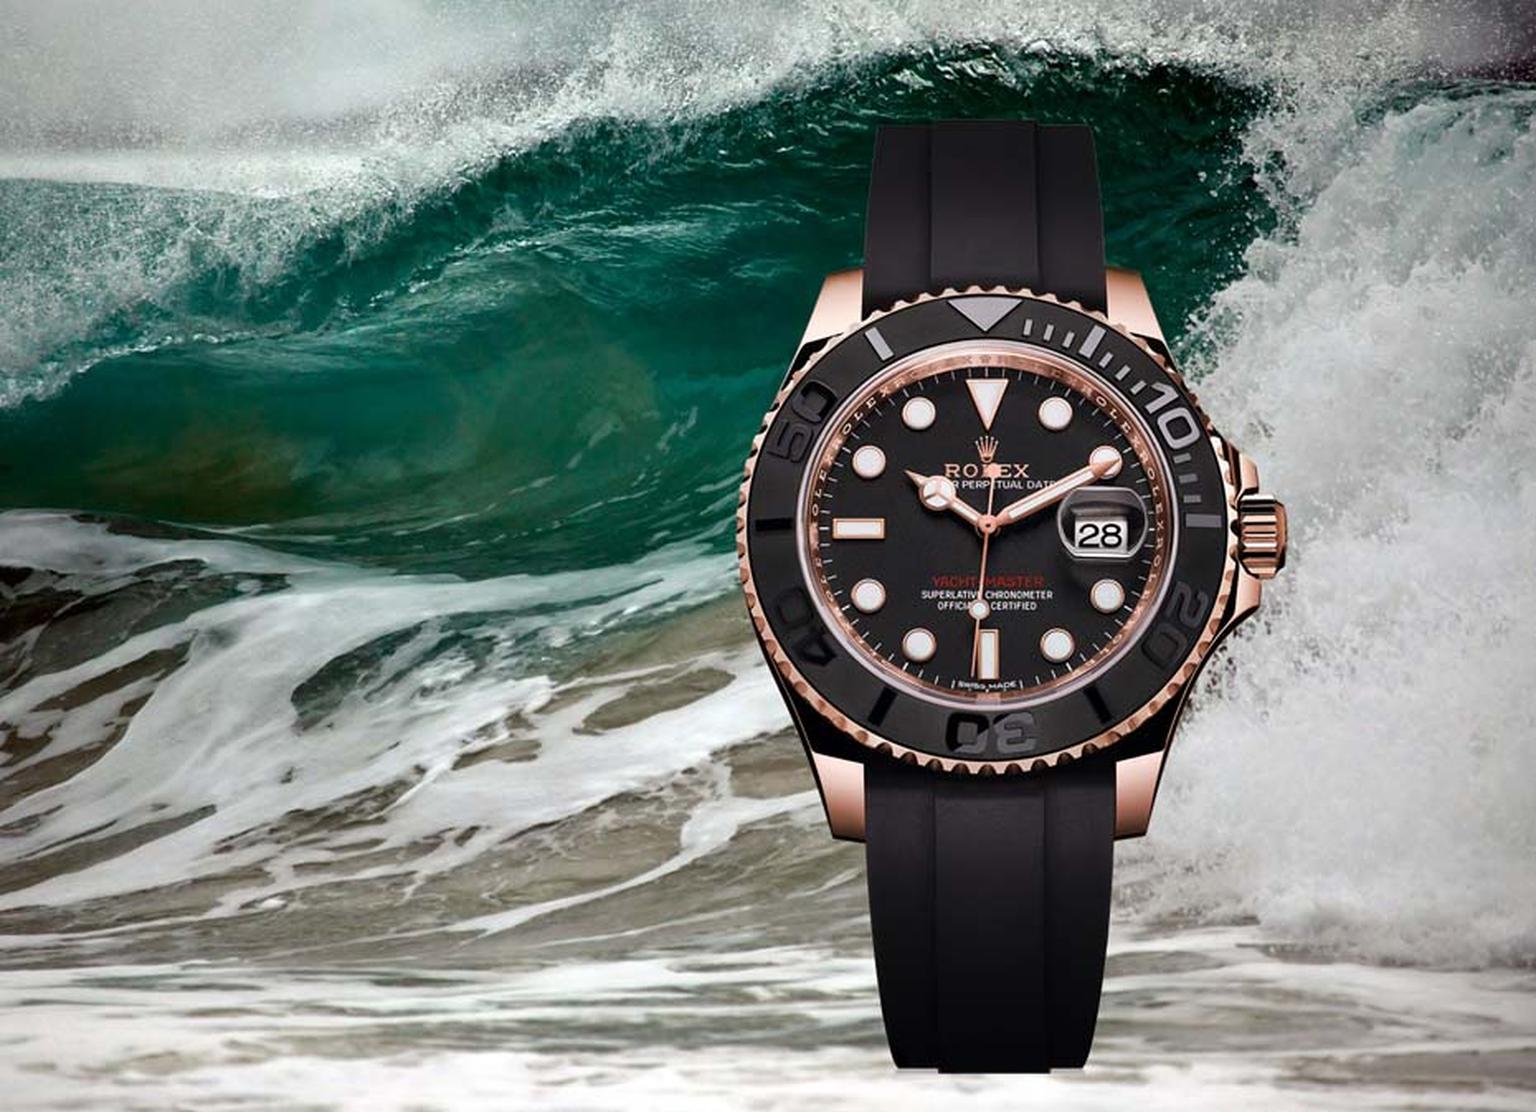 Rolex watches' new Yacht-Master, presented at Baselworld 2015 in an Everose gold case. This is the first time the Yacht-Master has been dressed in black, with the black matte dial, black ceramic bezel and new black Oysterflex bracelet giving this 40mm wat